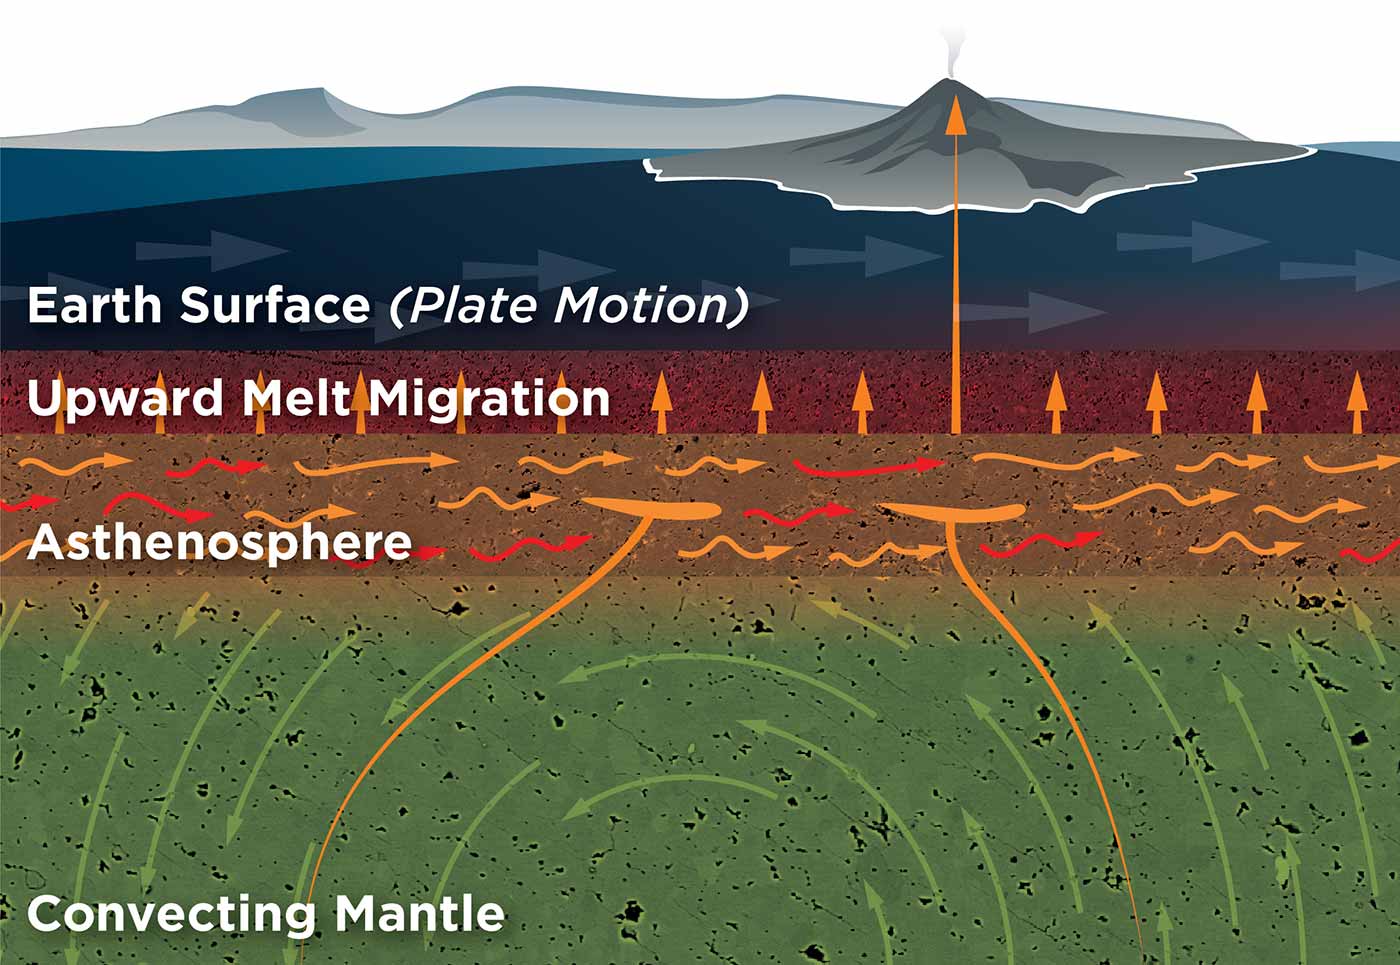 Image: A graphical depiction of the upward motion of melt through the earth's interior layers